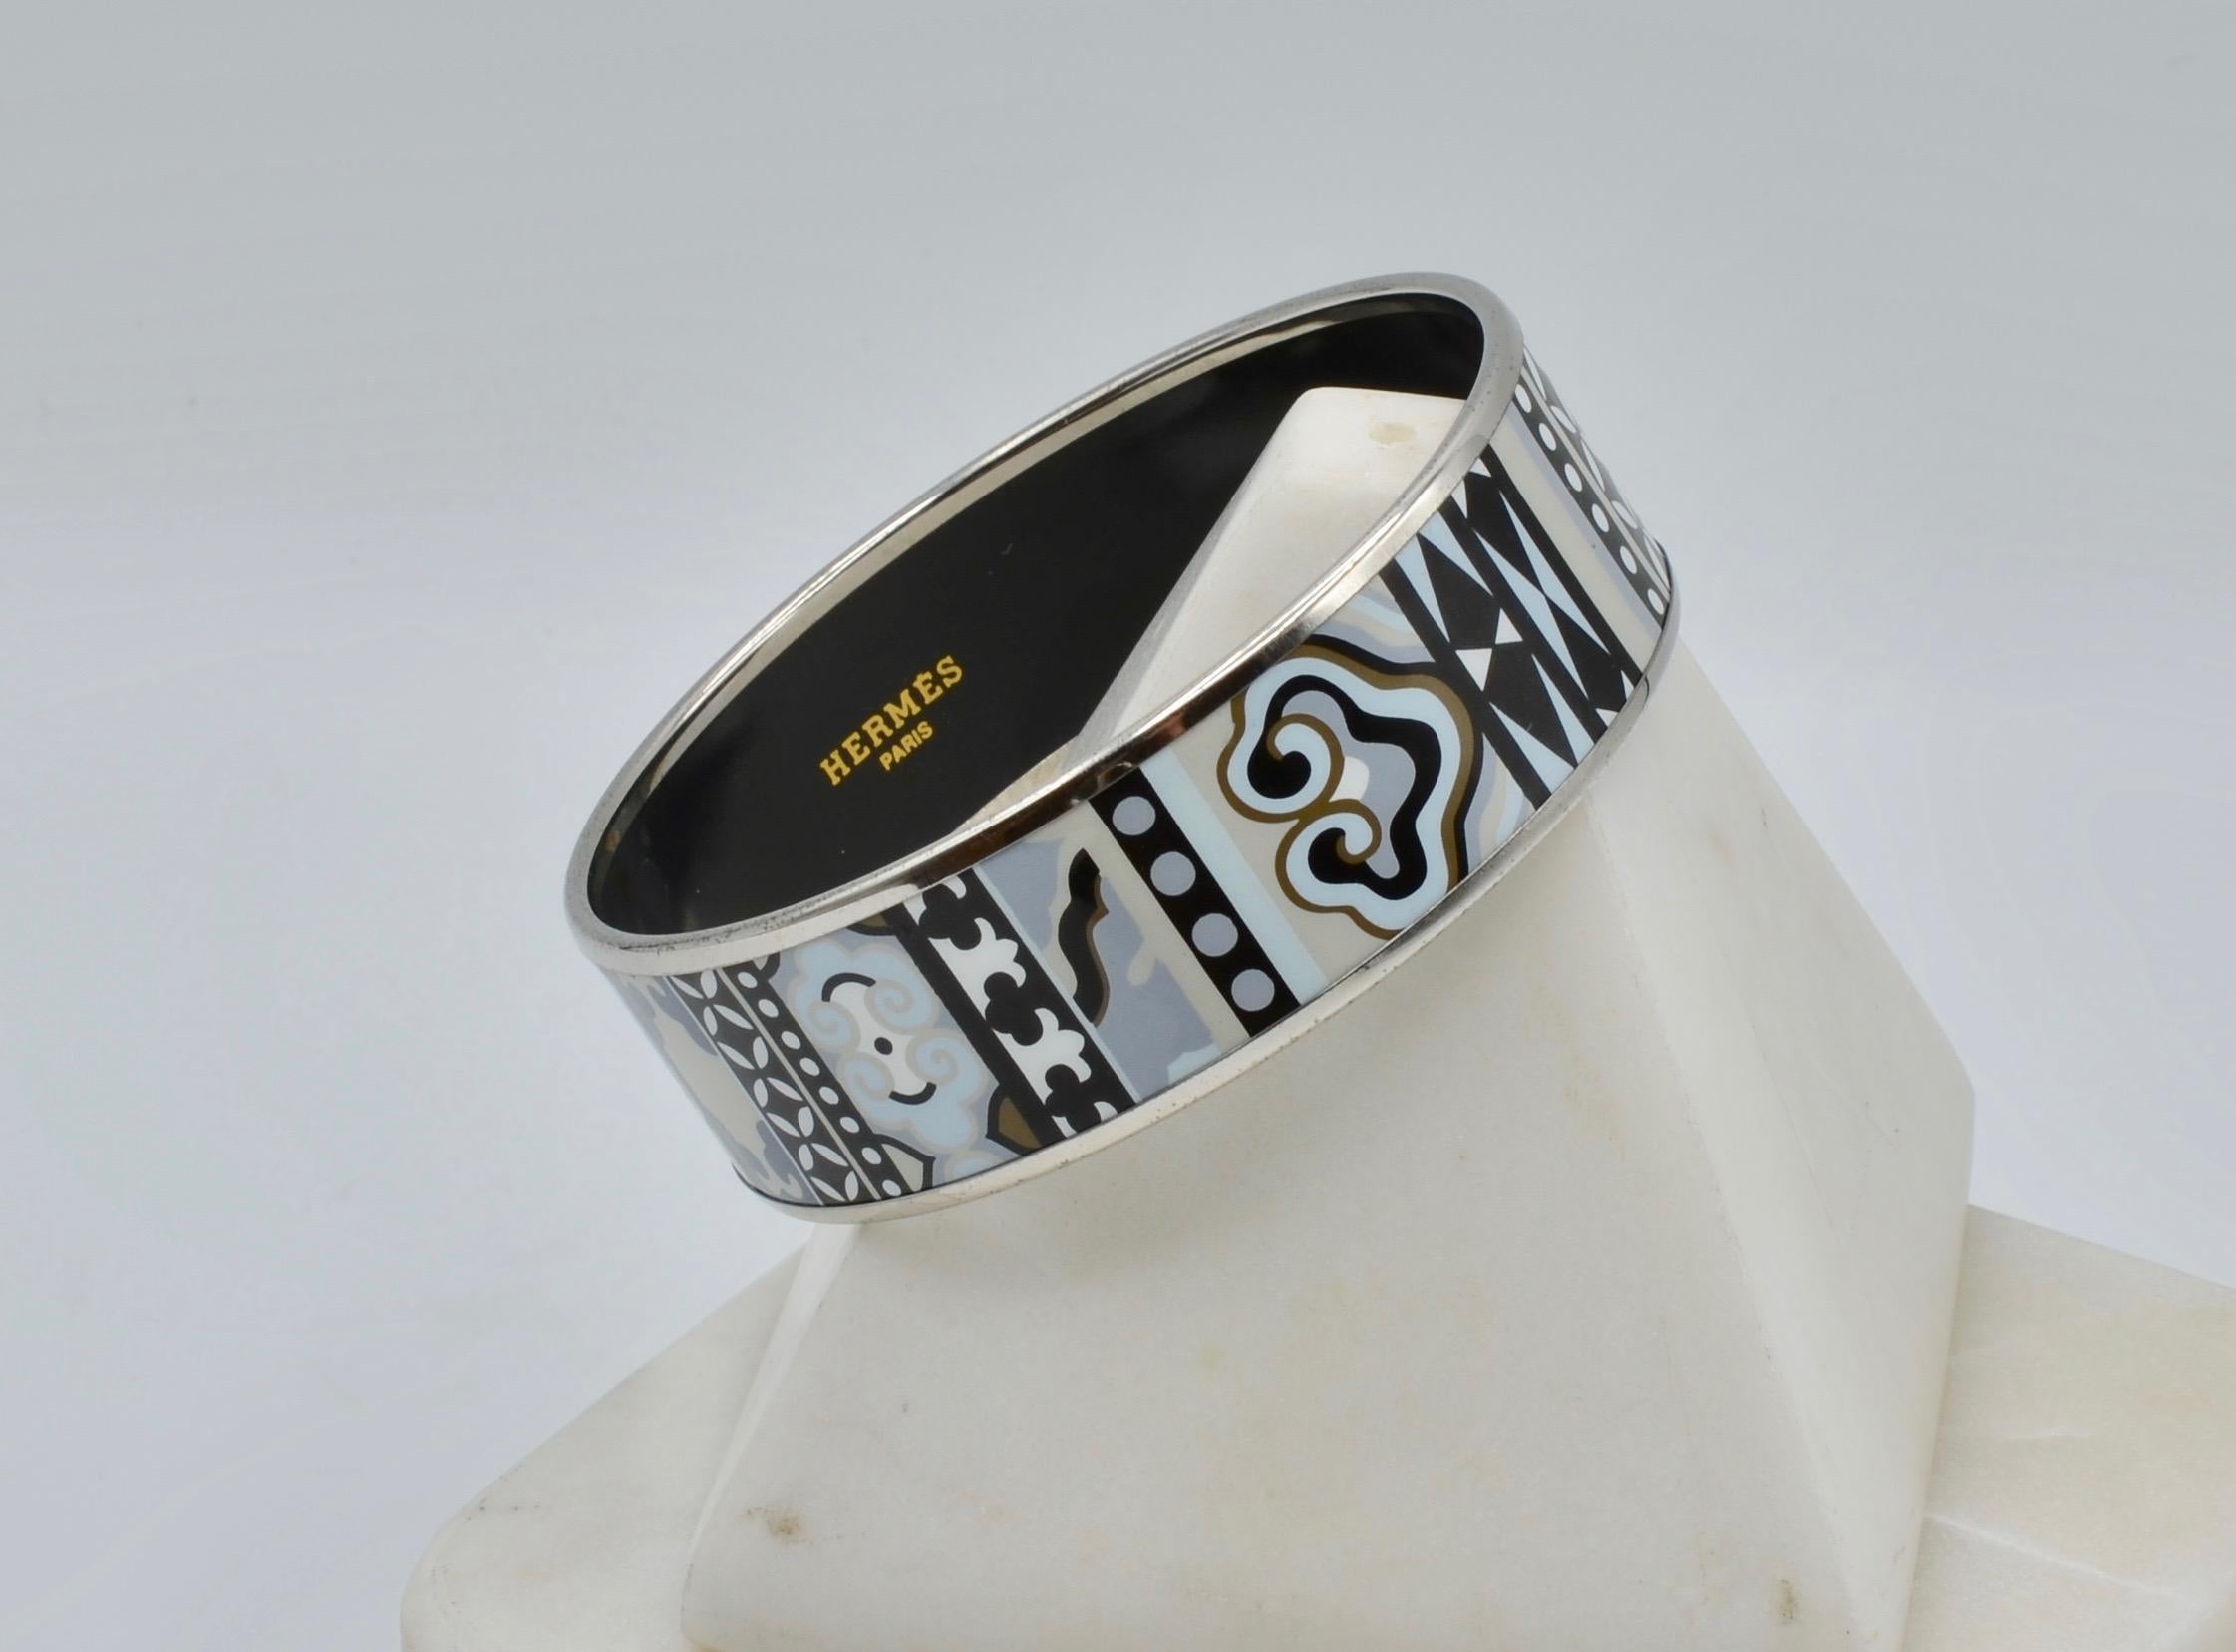 This lovely black and white motif bracelet is a grat addition to any collection as the neutral motif goes with any color scheme. It is 8 1/4